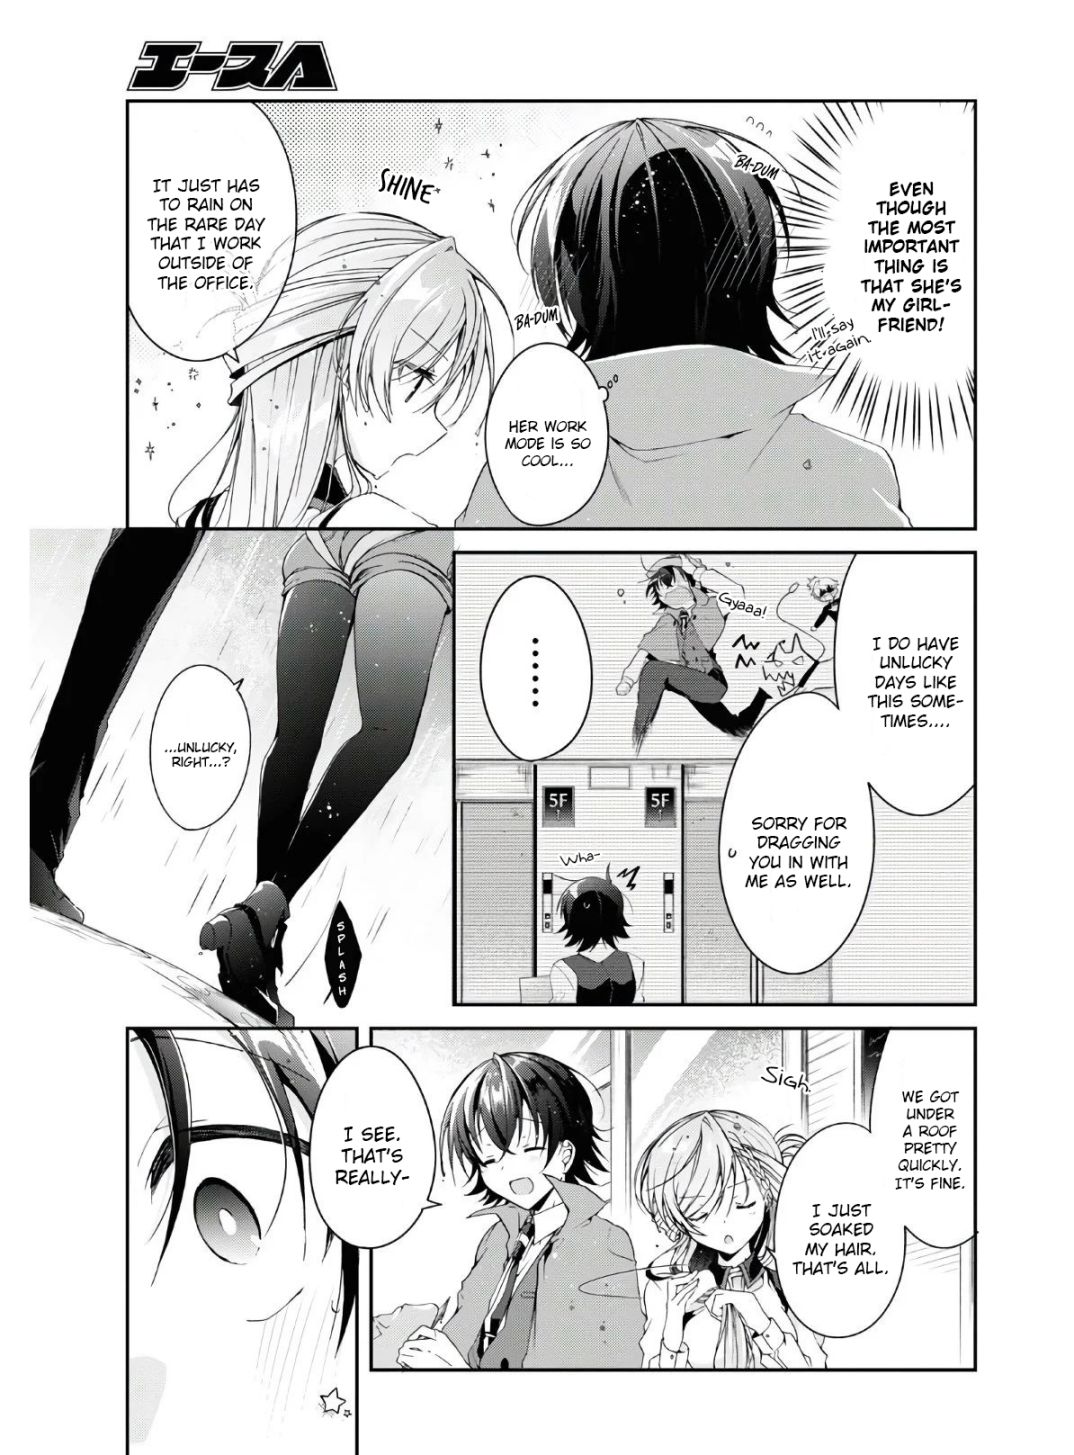 Isshiki-san Wants to Know About Love. - chapter 11.5 - #3